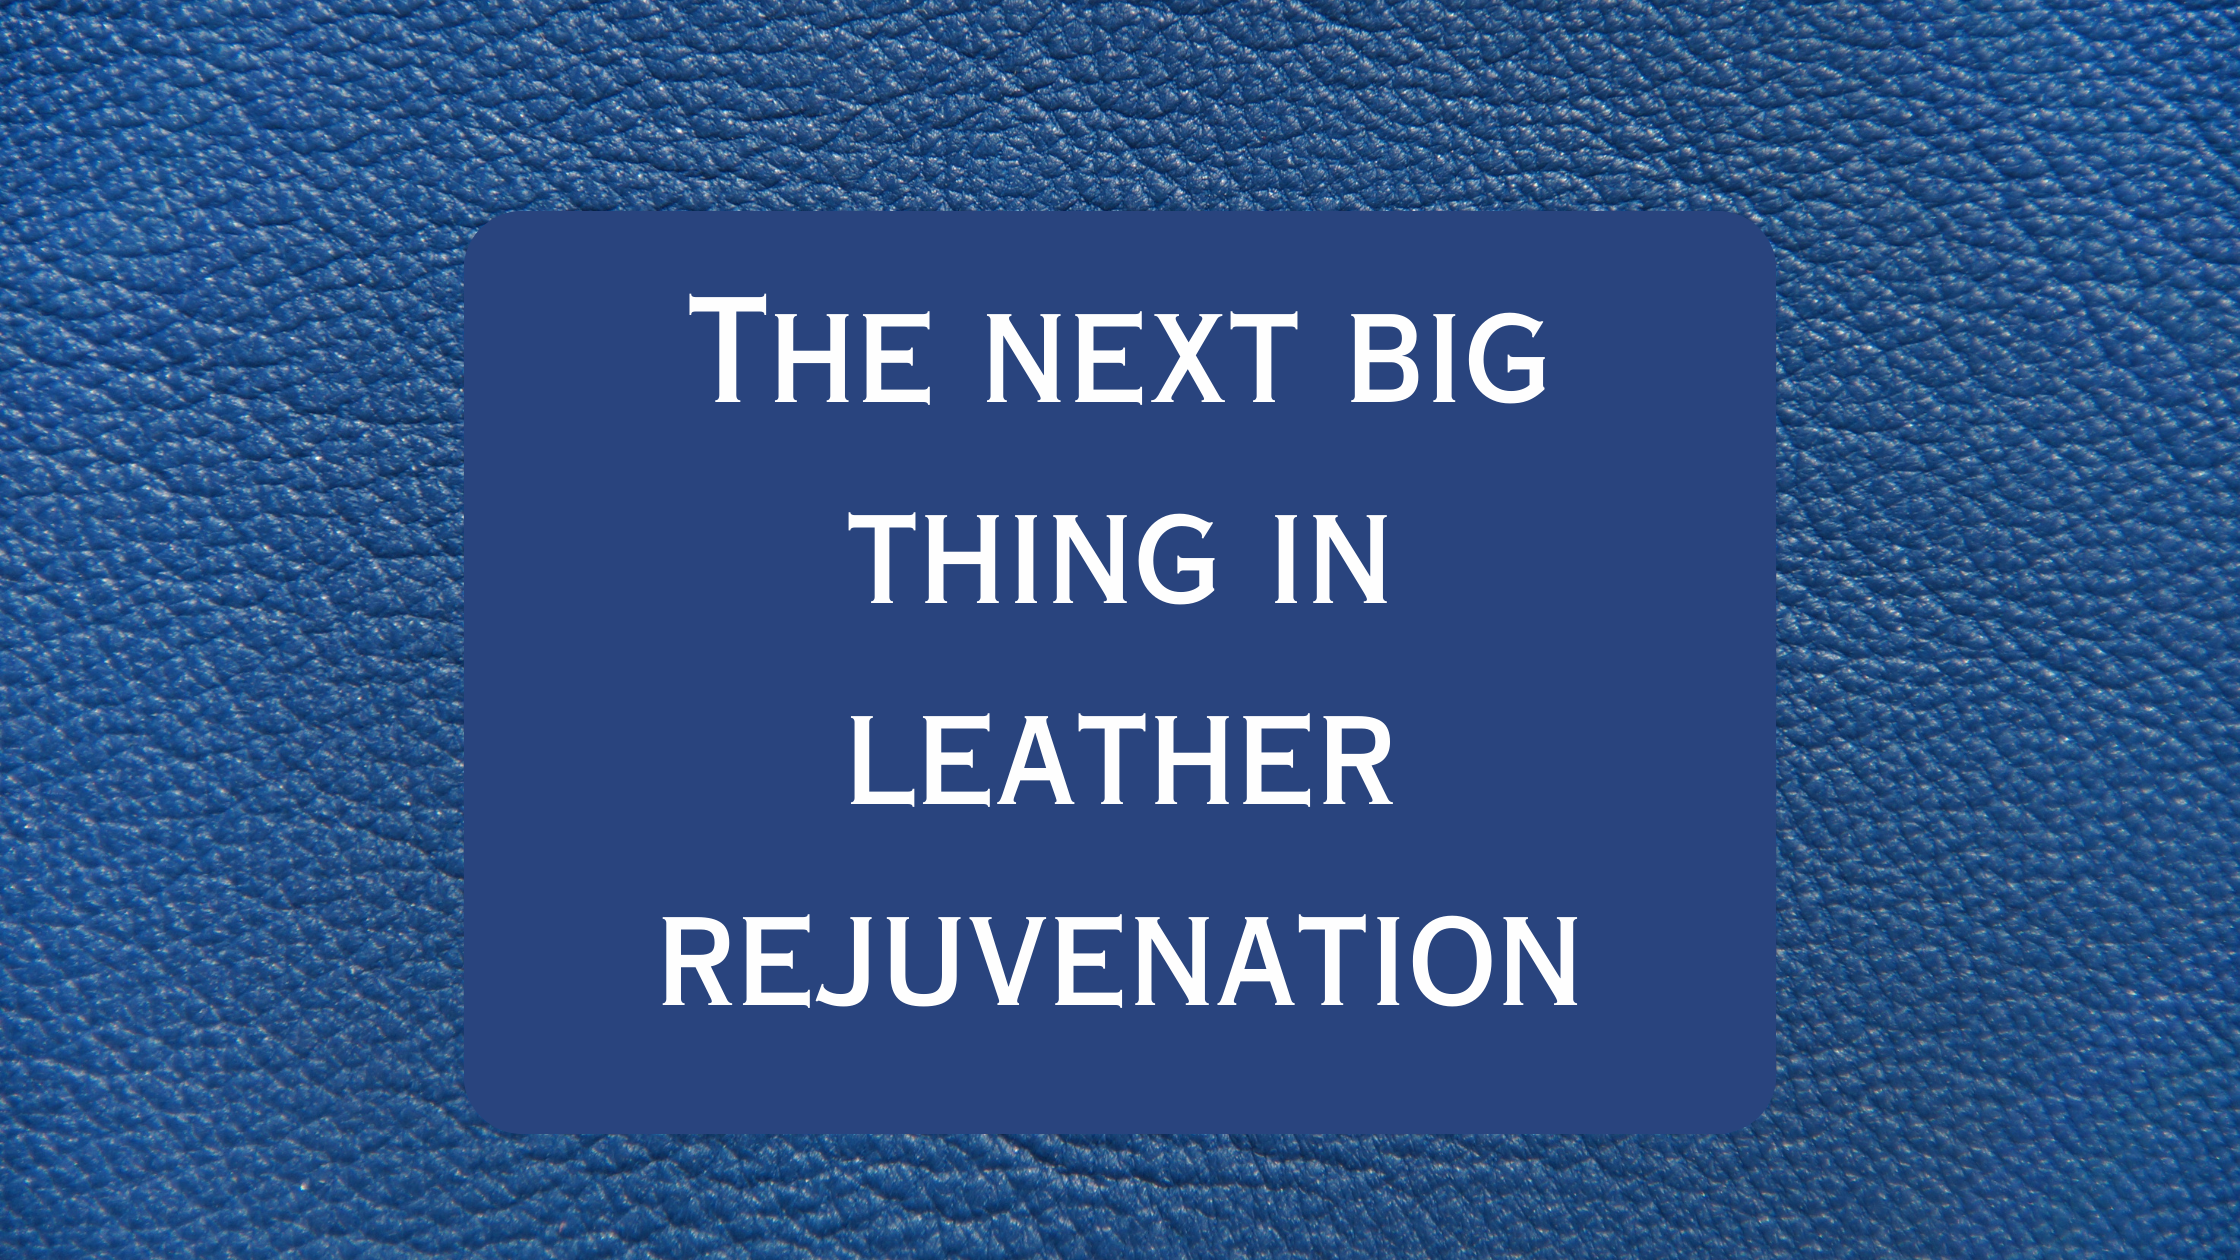 The next big thing in leather rejuvenation - Commercial Leather Cleaning Service 1